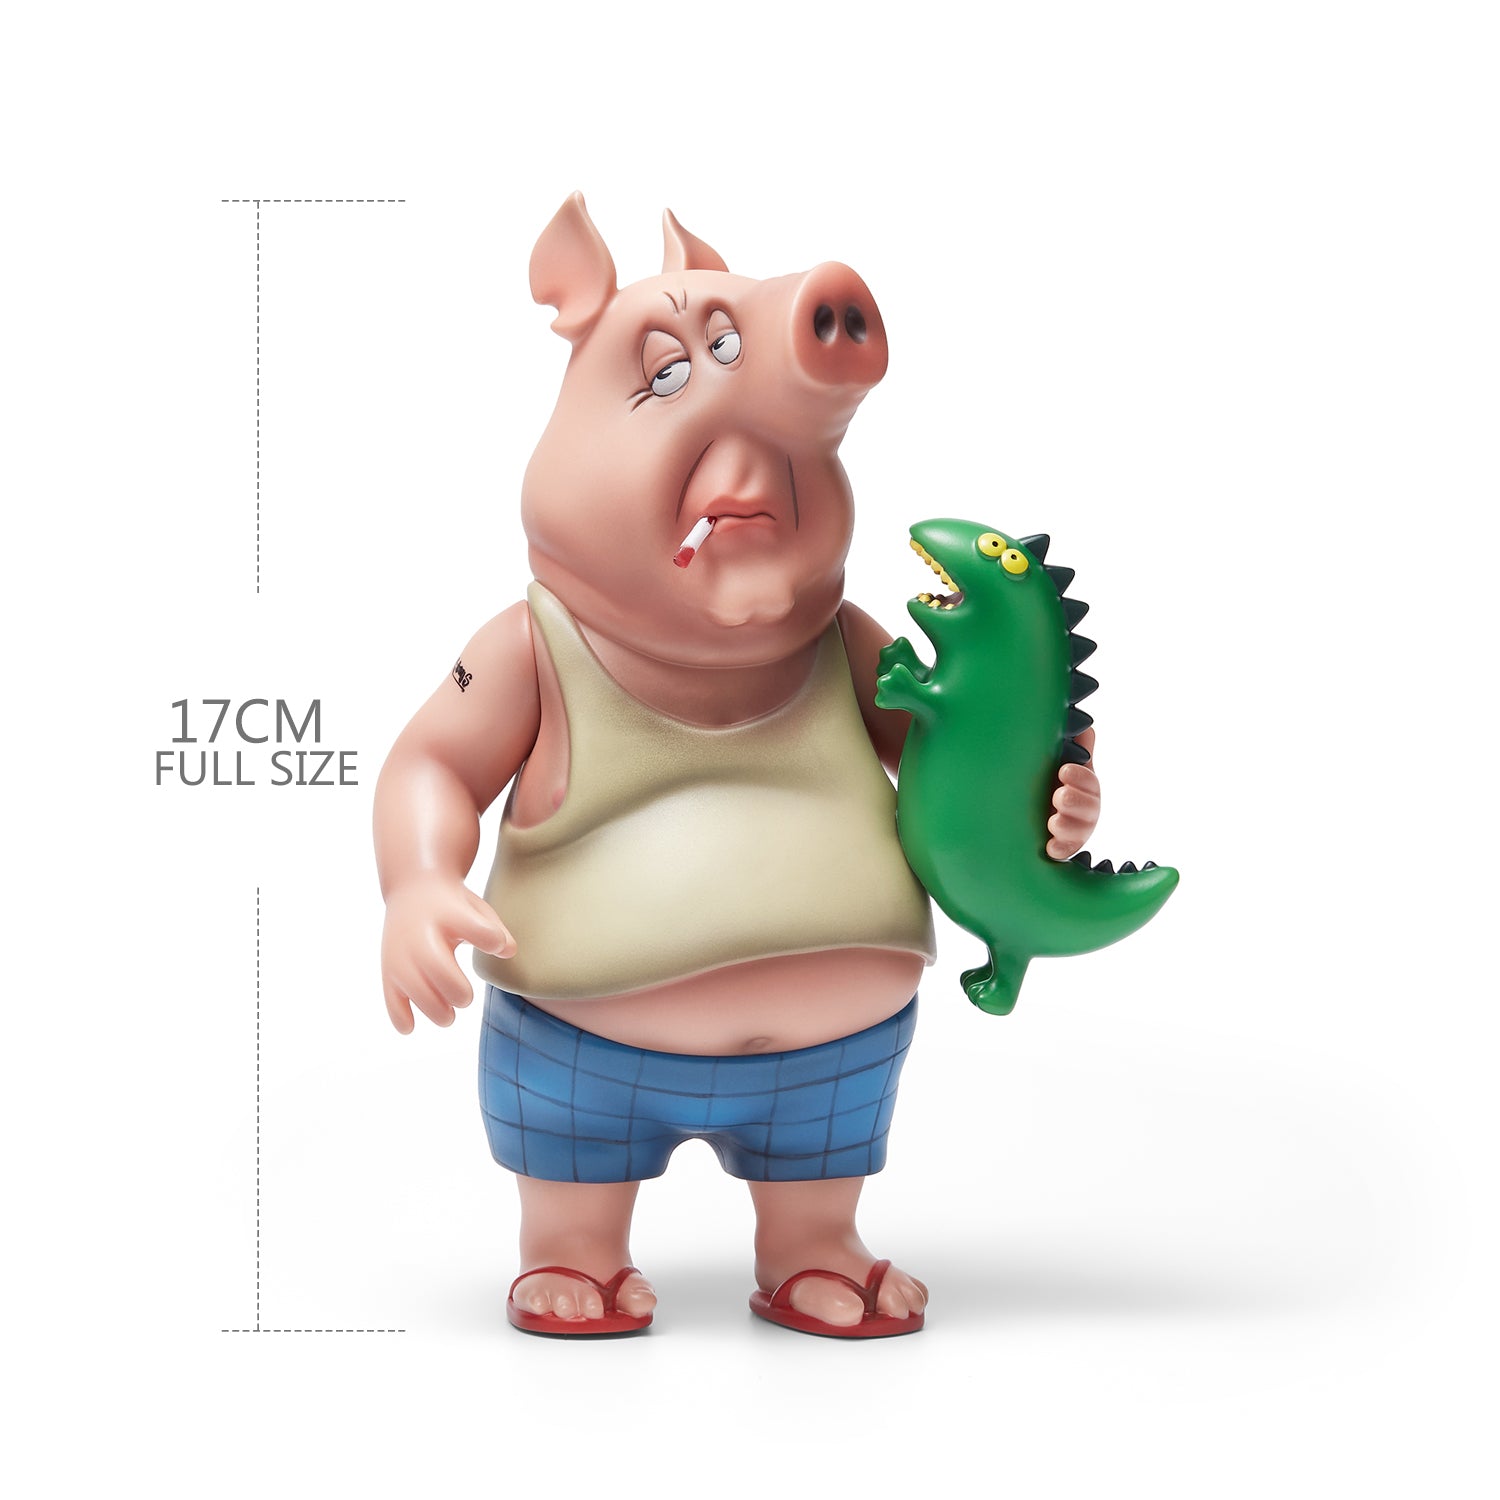 funny statue of Mr. Pig collecting dinosaur kaiju giant lizard monster figure  Brand: DLZTOYS  Material: PVC  Height: 17cm